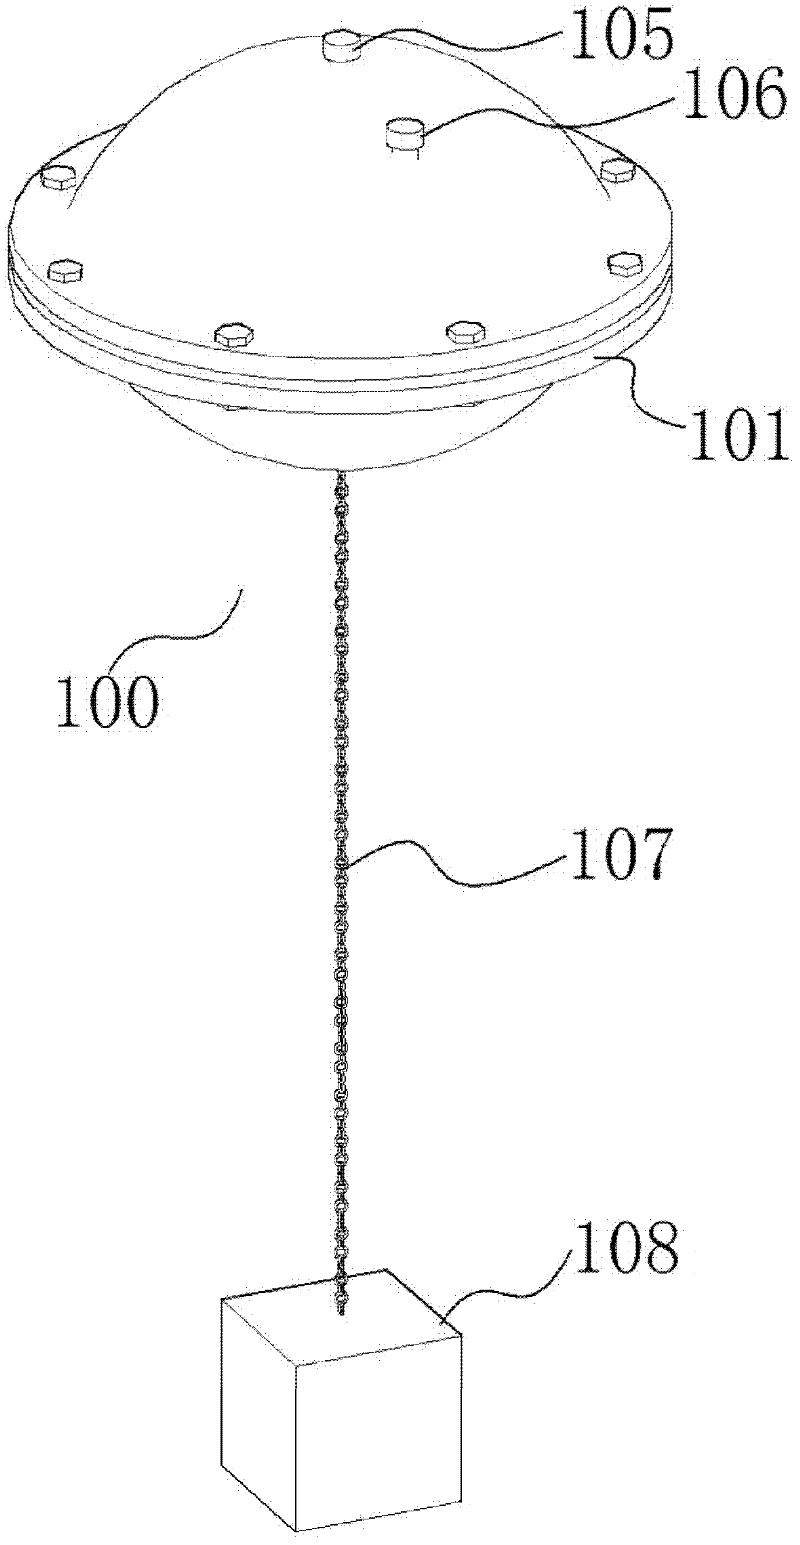 Surface velocity and flow direction measuring device